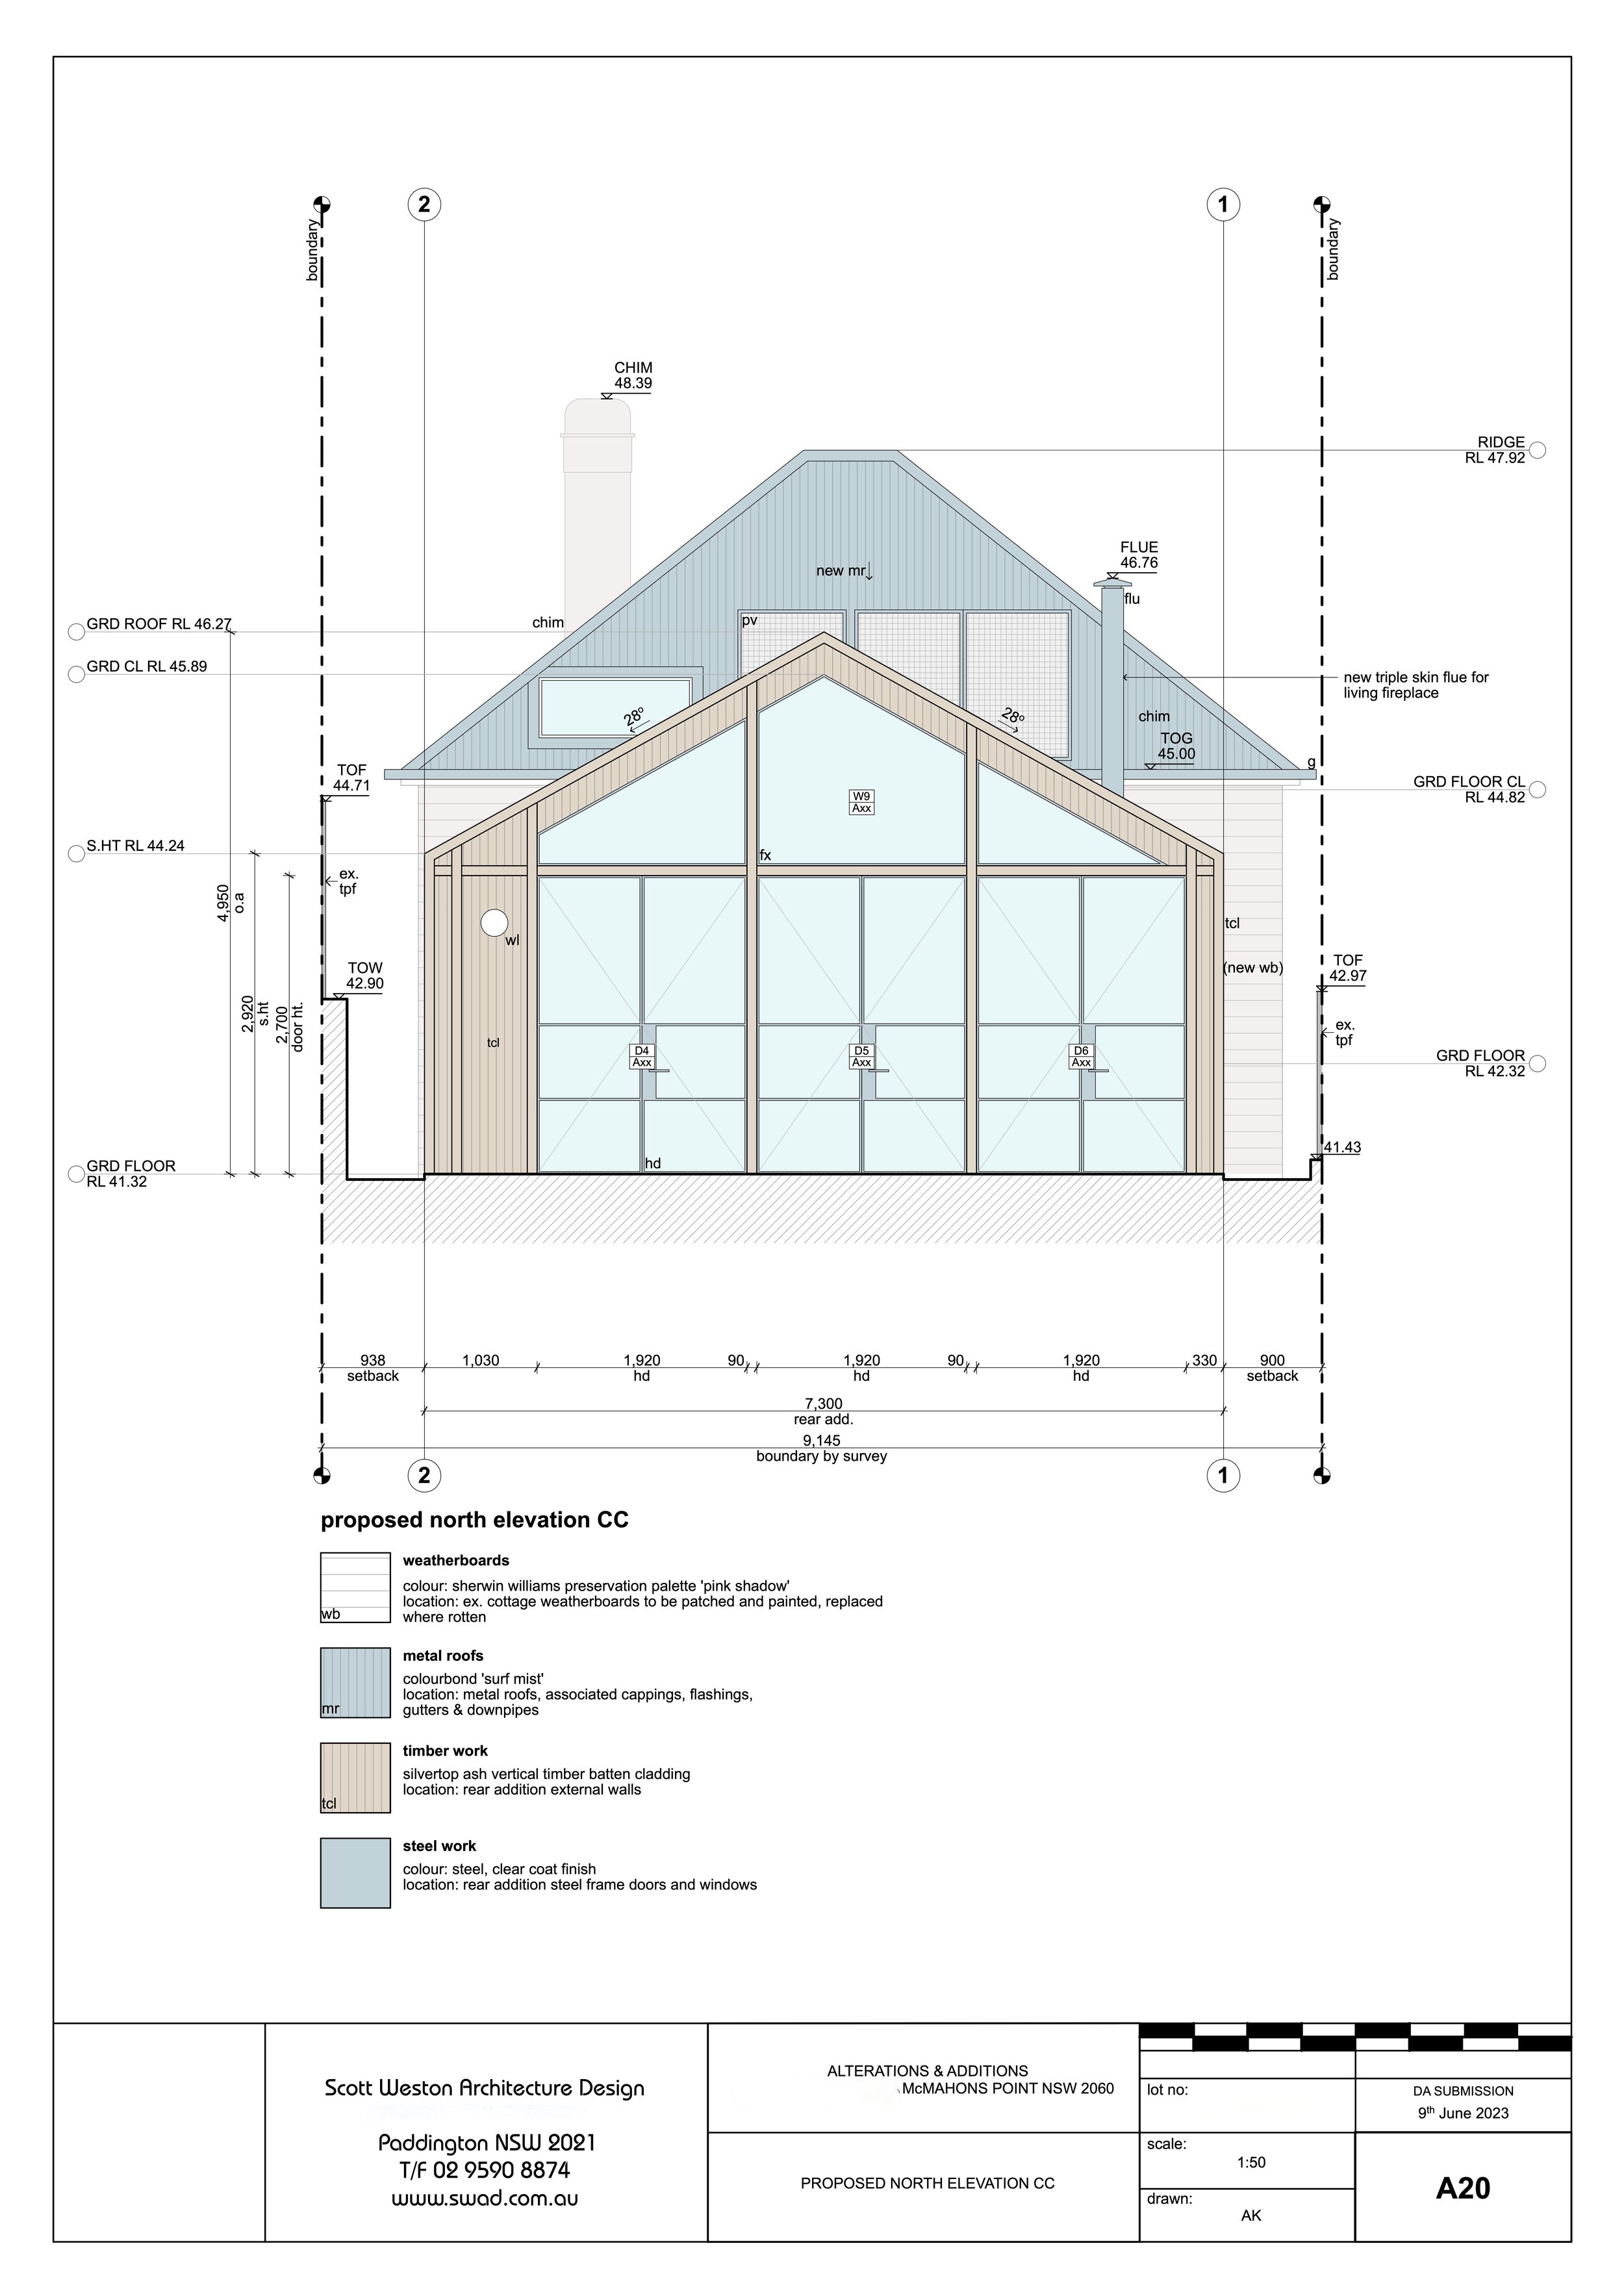 A20 PROPOSED NORTH ELEVATION CC.jpg